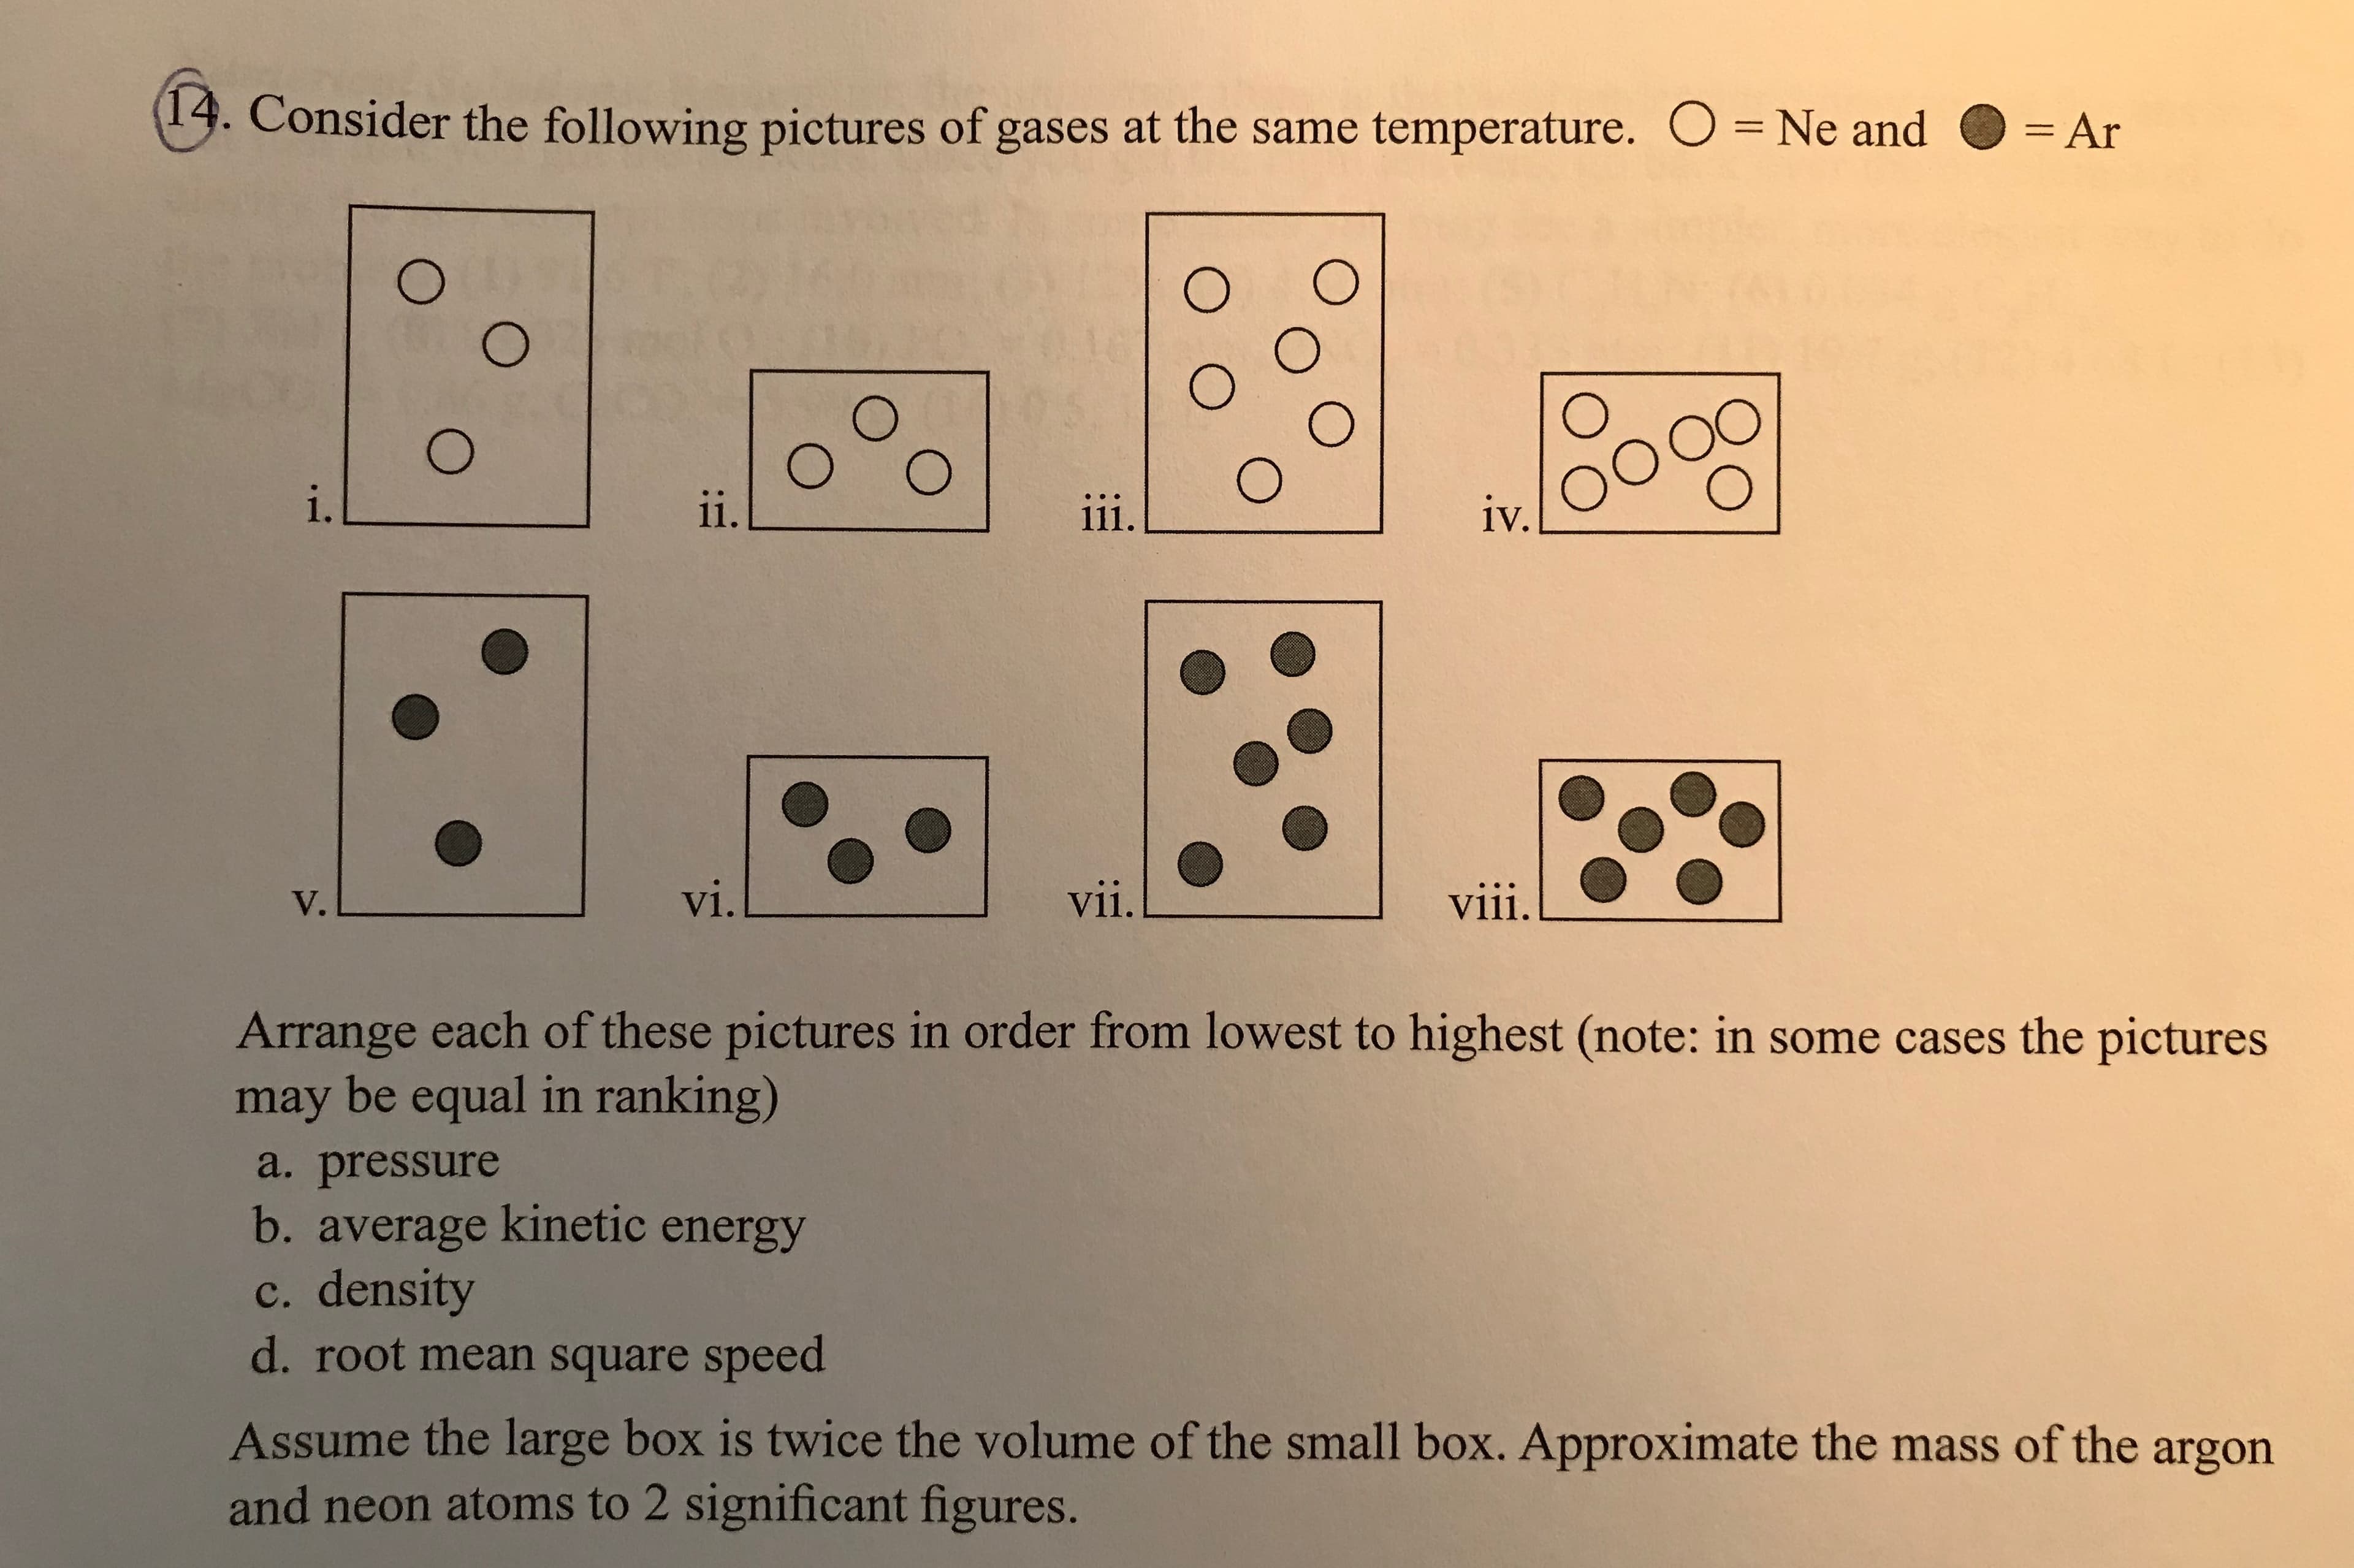 13. Consider the following pictures of gases at the same temperature.
O Ne and -Ar
= Ar
.
1V.
V.
V1
vii.
Arrange each of these pictures in order from lowest to highest (note: in some cases the pictures
may be equal in ranking)
a. pressure
b. average kinetic energy
c. density
d. root mean square speed
Assume the large box is twice the volume of the small box. Approximate the mass of the argon
and neon atoms to 2 significant figures.
